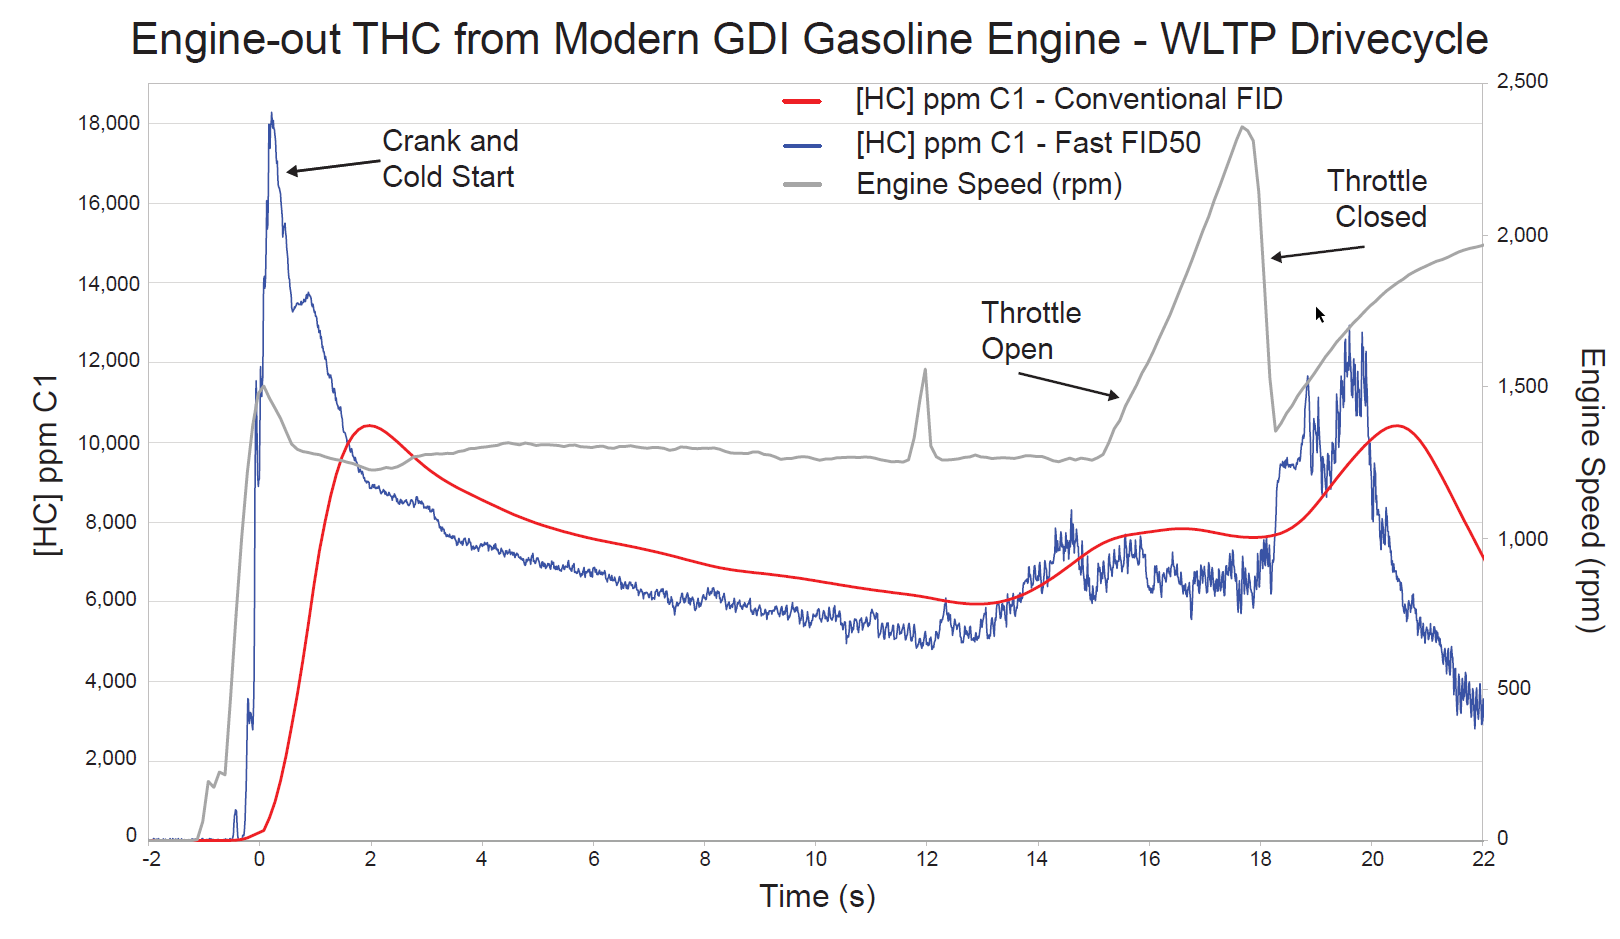 Engine-out THC from modern GDI gasoline engine - WLTP drive-cycle